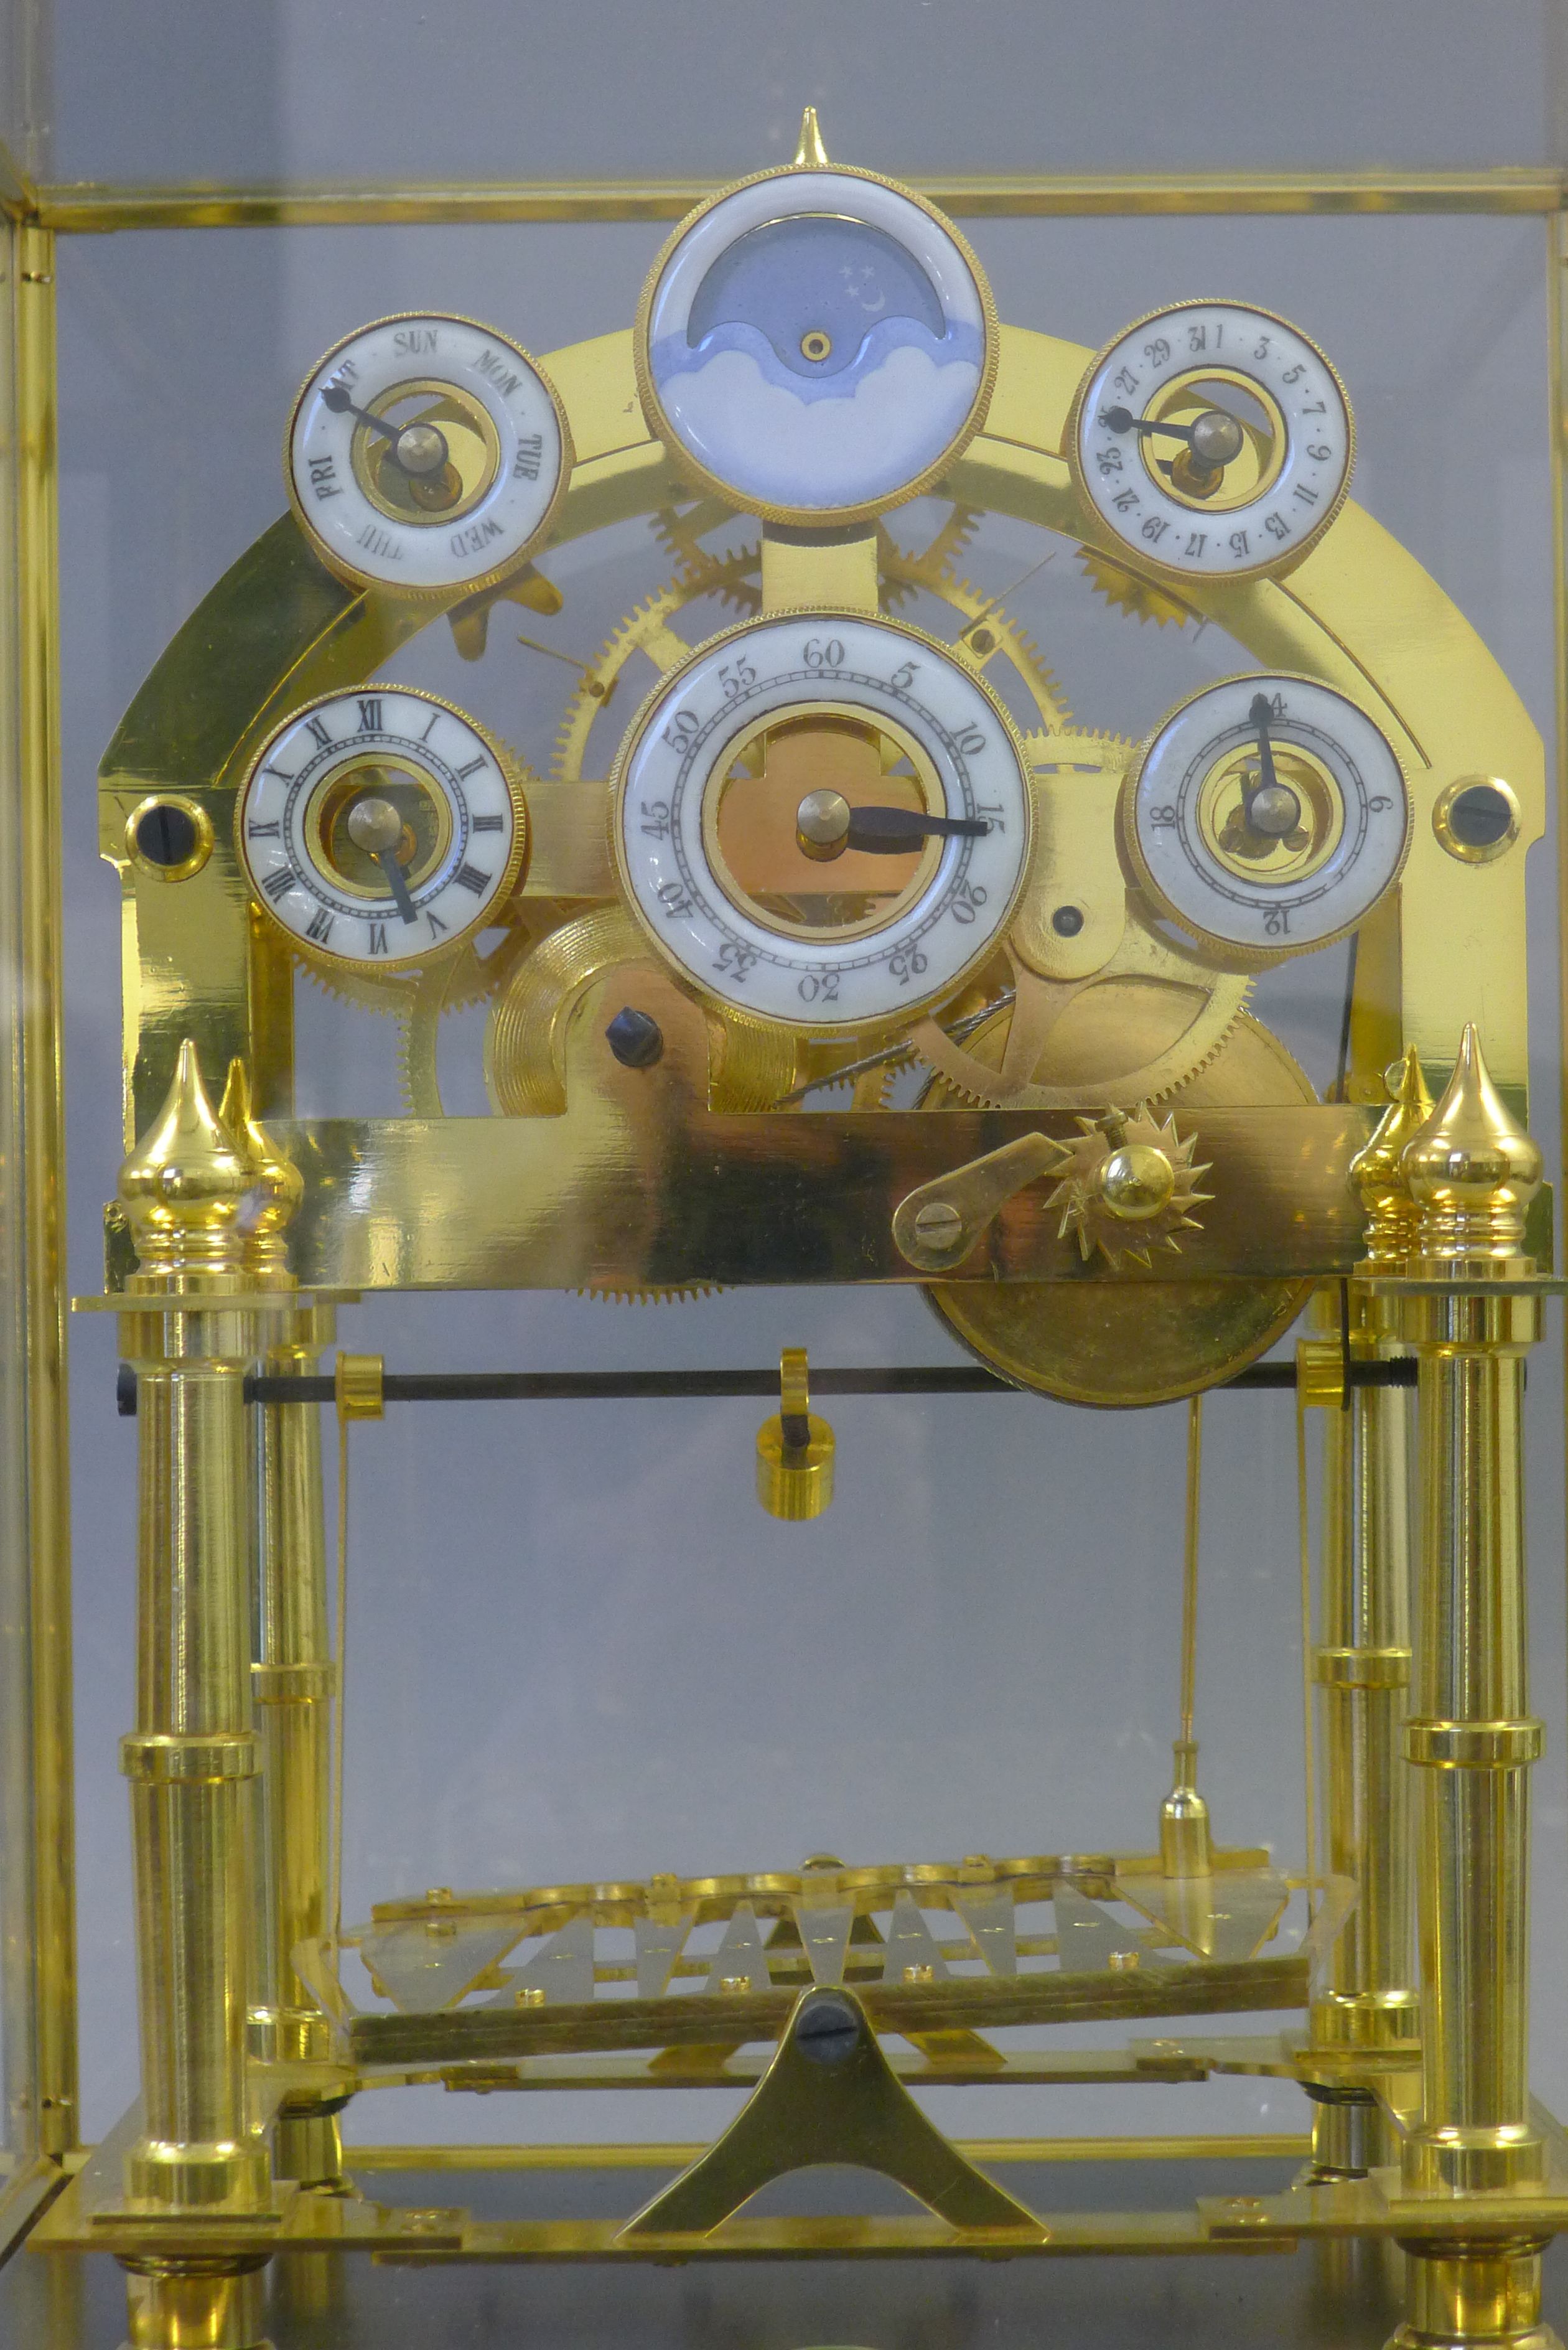 A moon phase congreave clock. 43 cm high. - Image 2 of 5